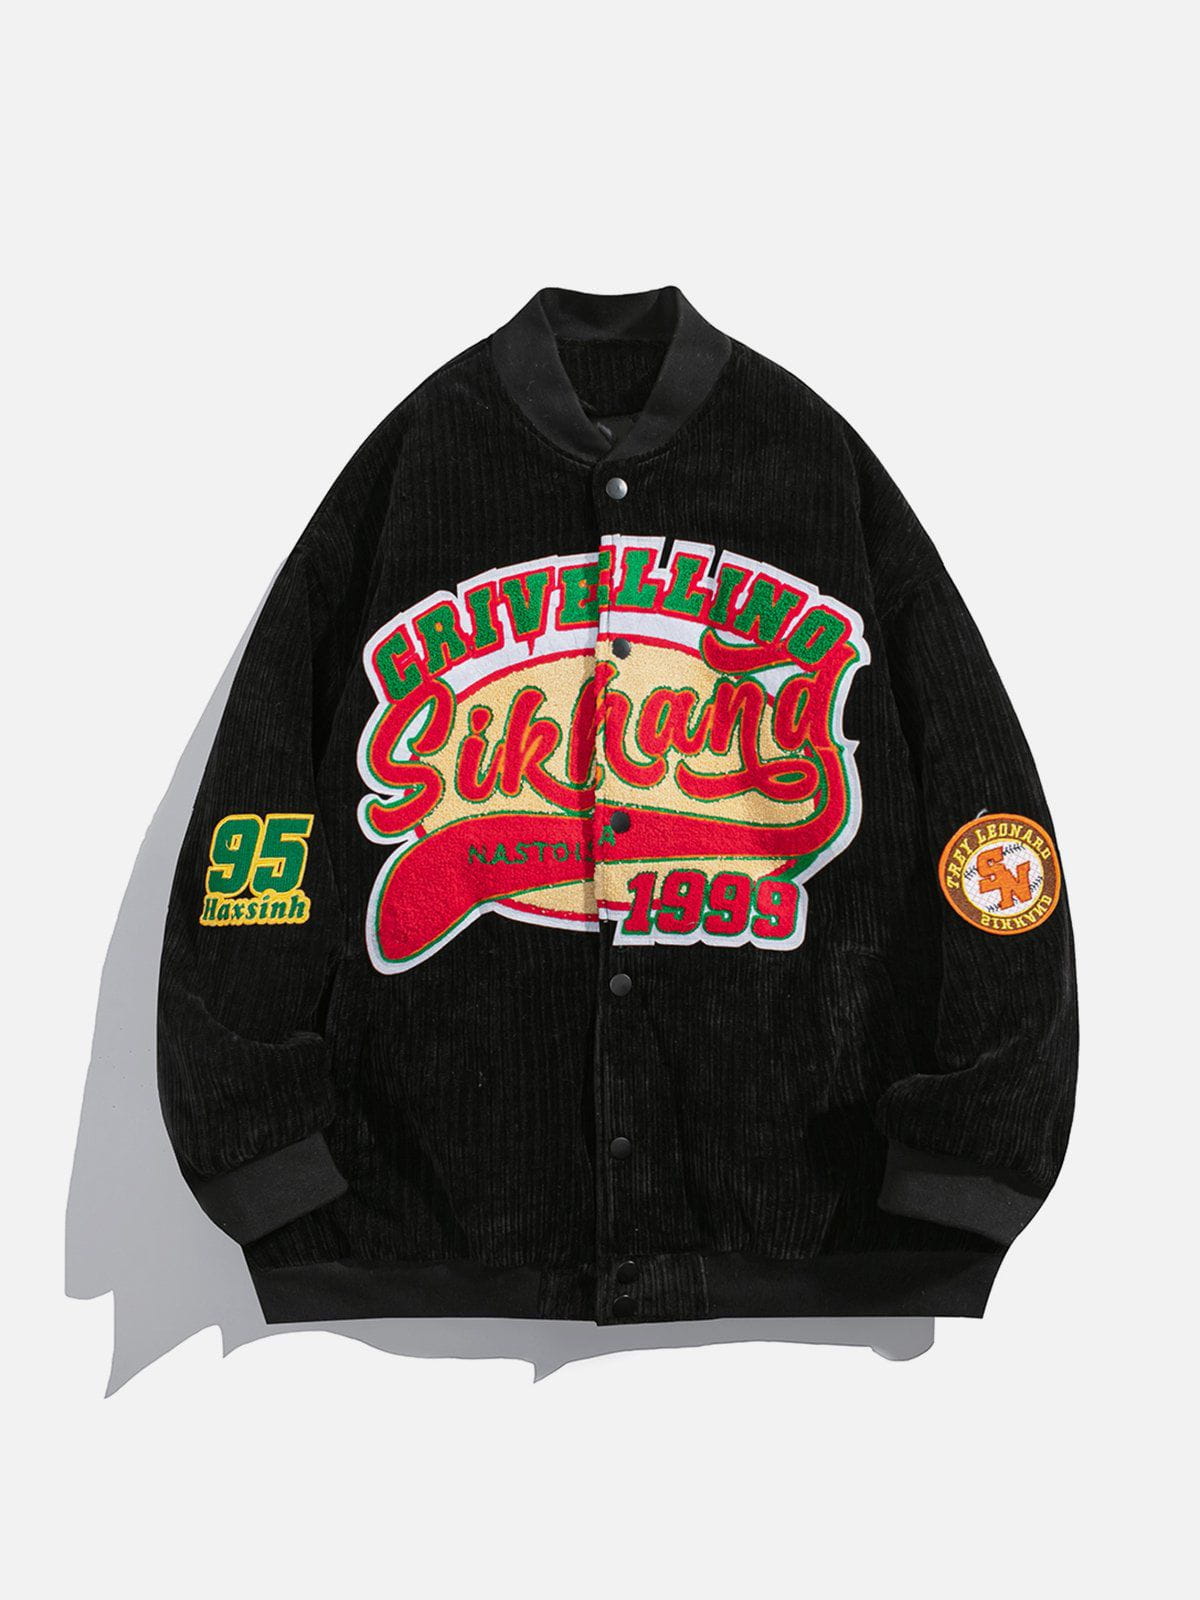 Sneakerland™ - Large Patch Embroidered Corduroy Winter Coat